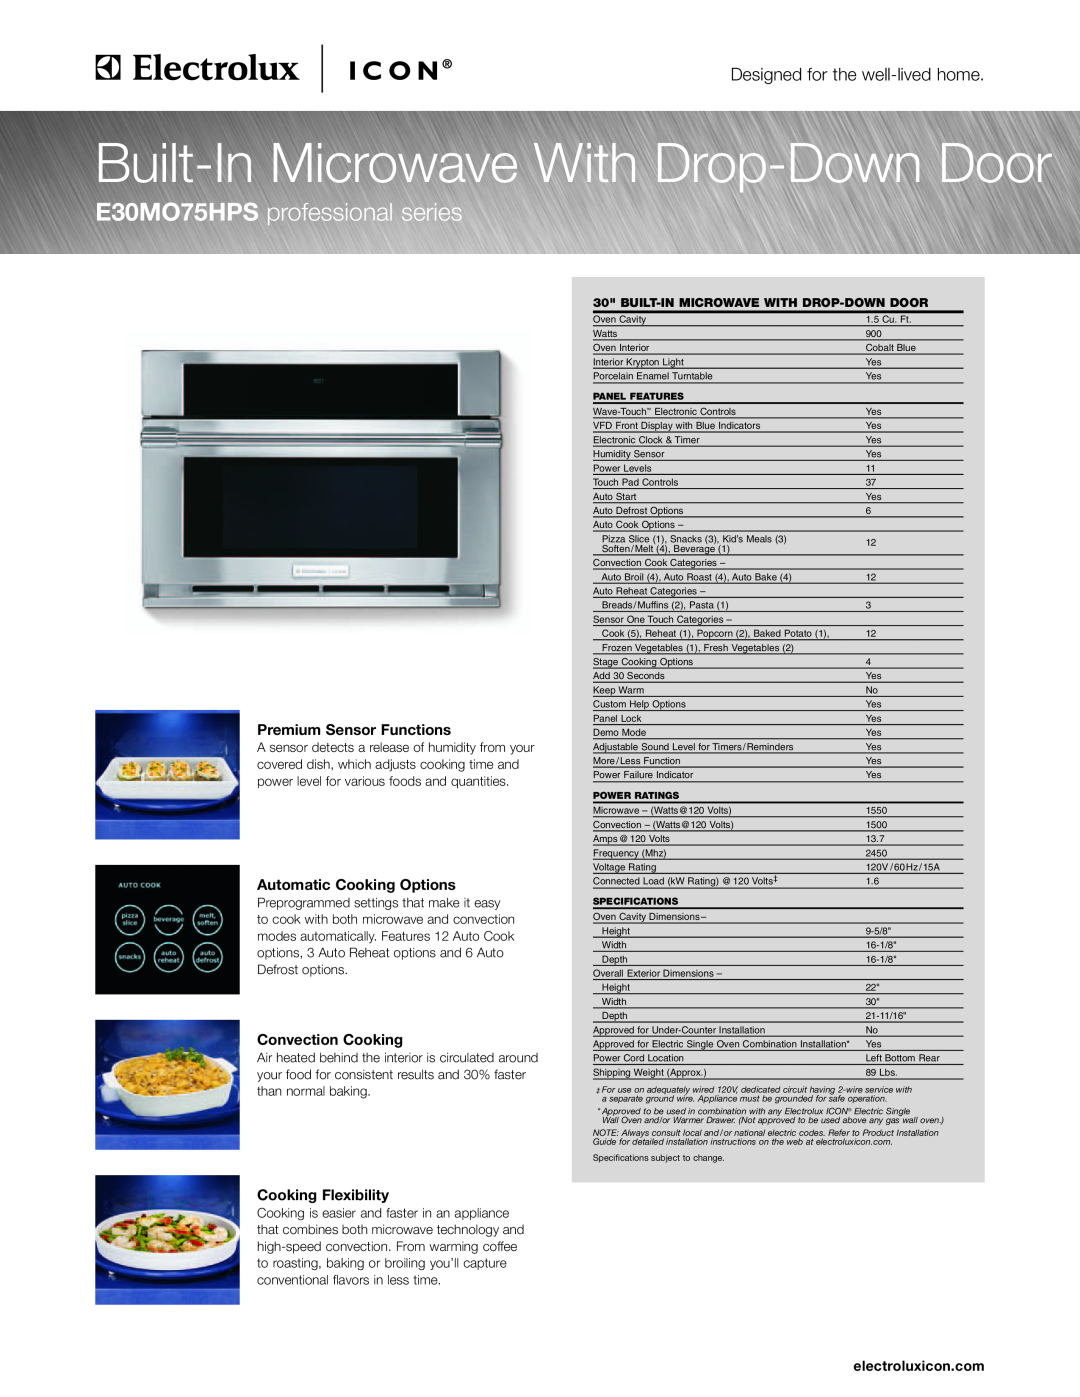 Electrolux E30MO75HSS specifications E30MO75HPS professional series, Premium Sensor Functions, Automatic Cooking Options 